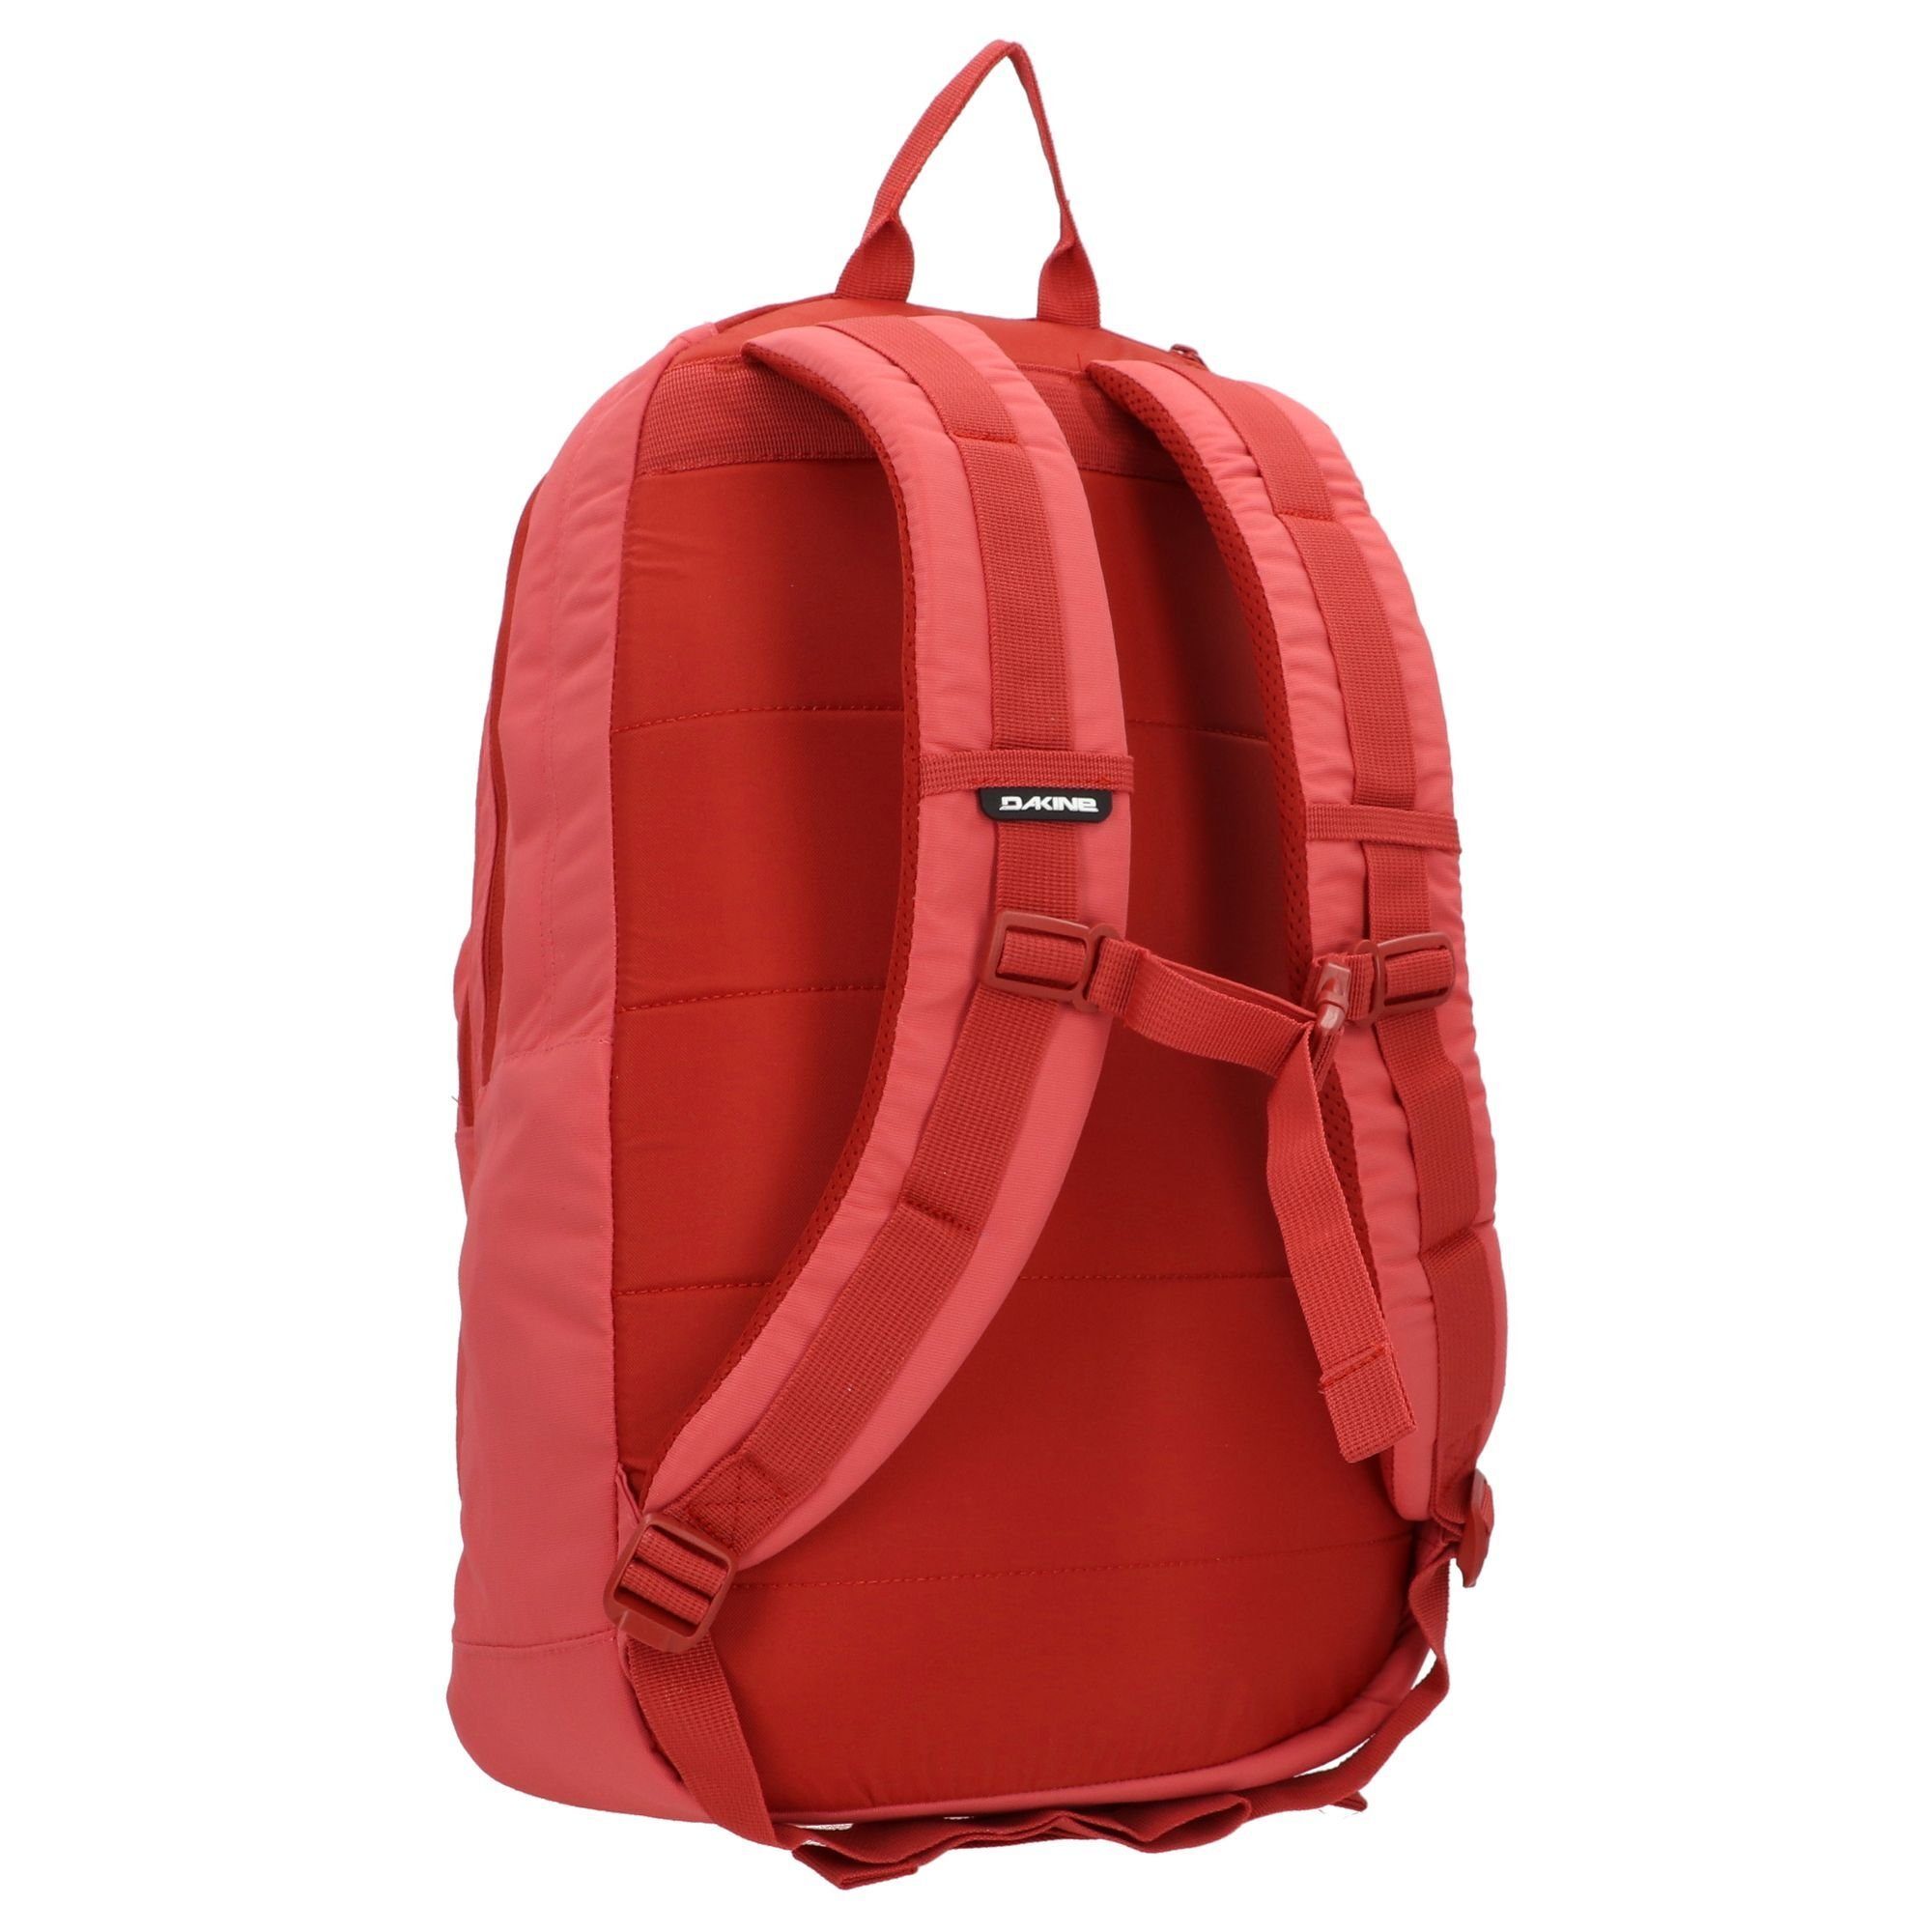 DLX, 365 Dakine mineral Daypack Pack Polyester red